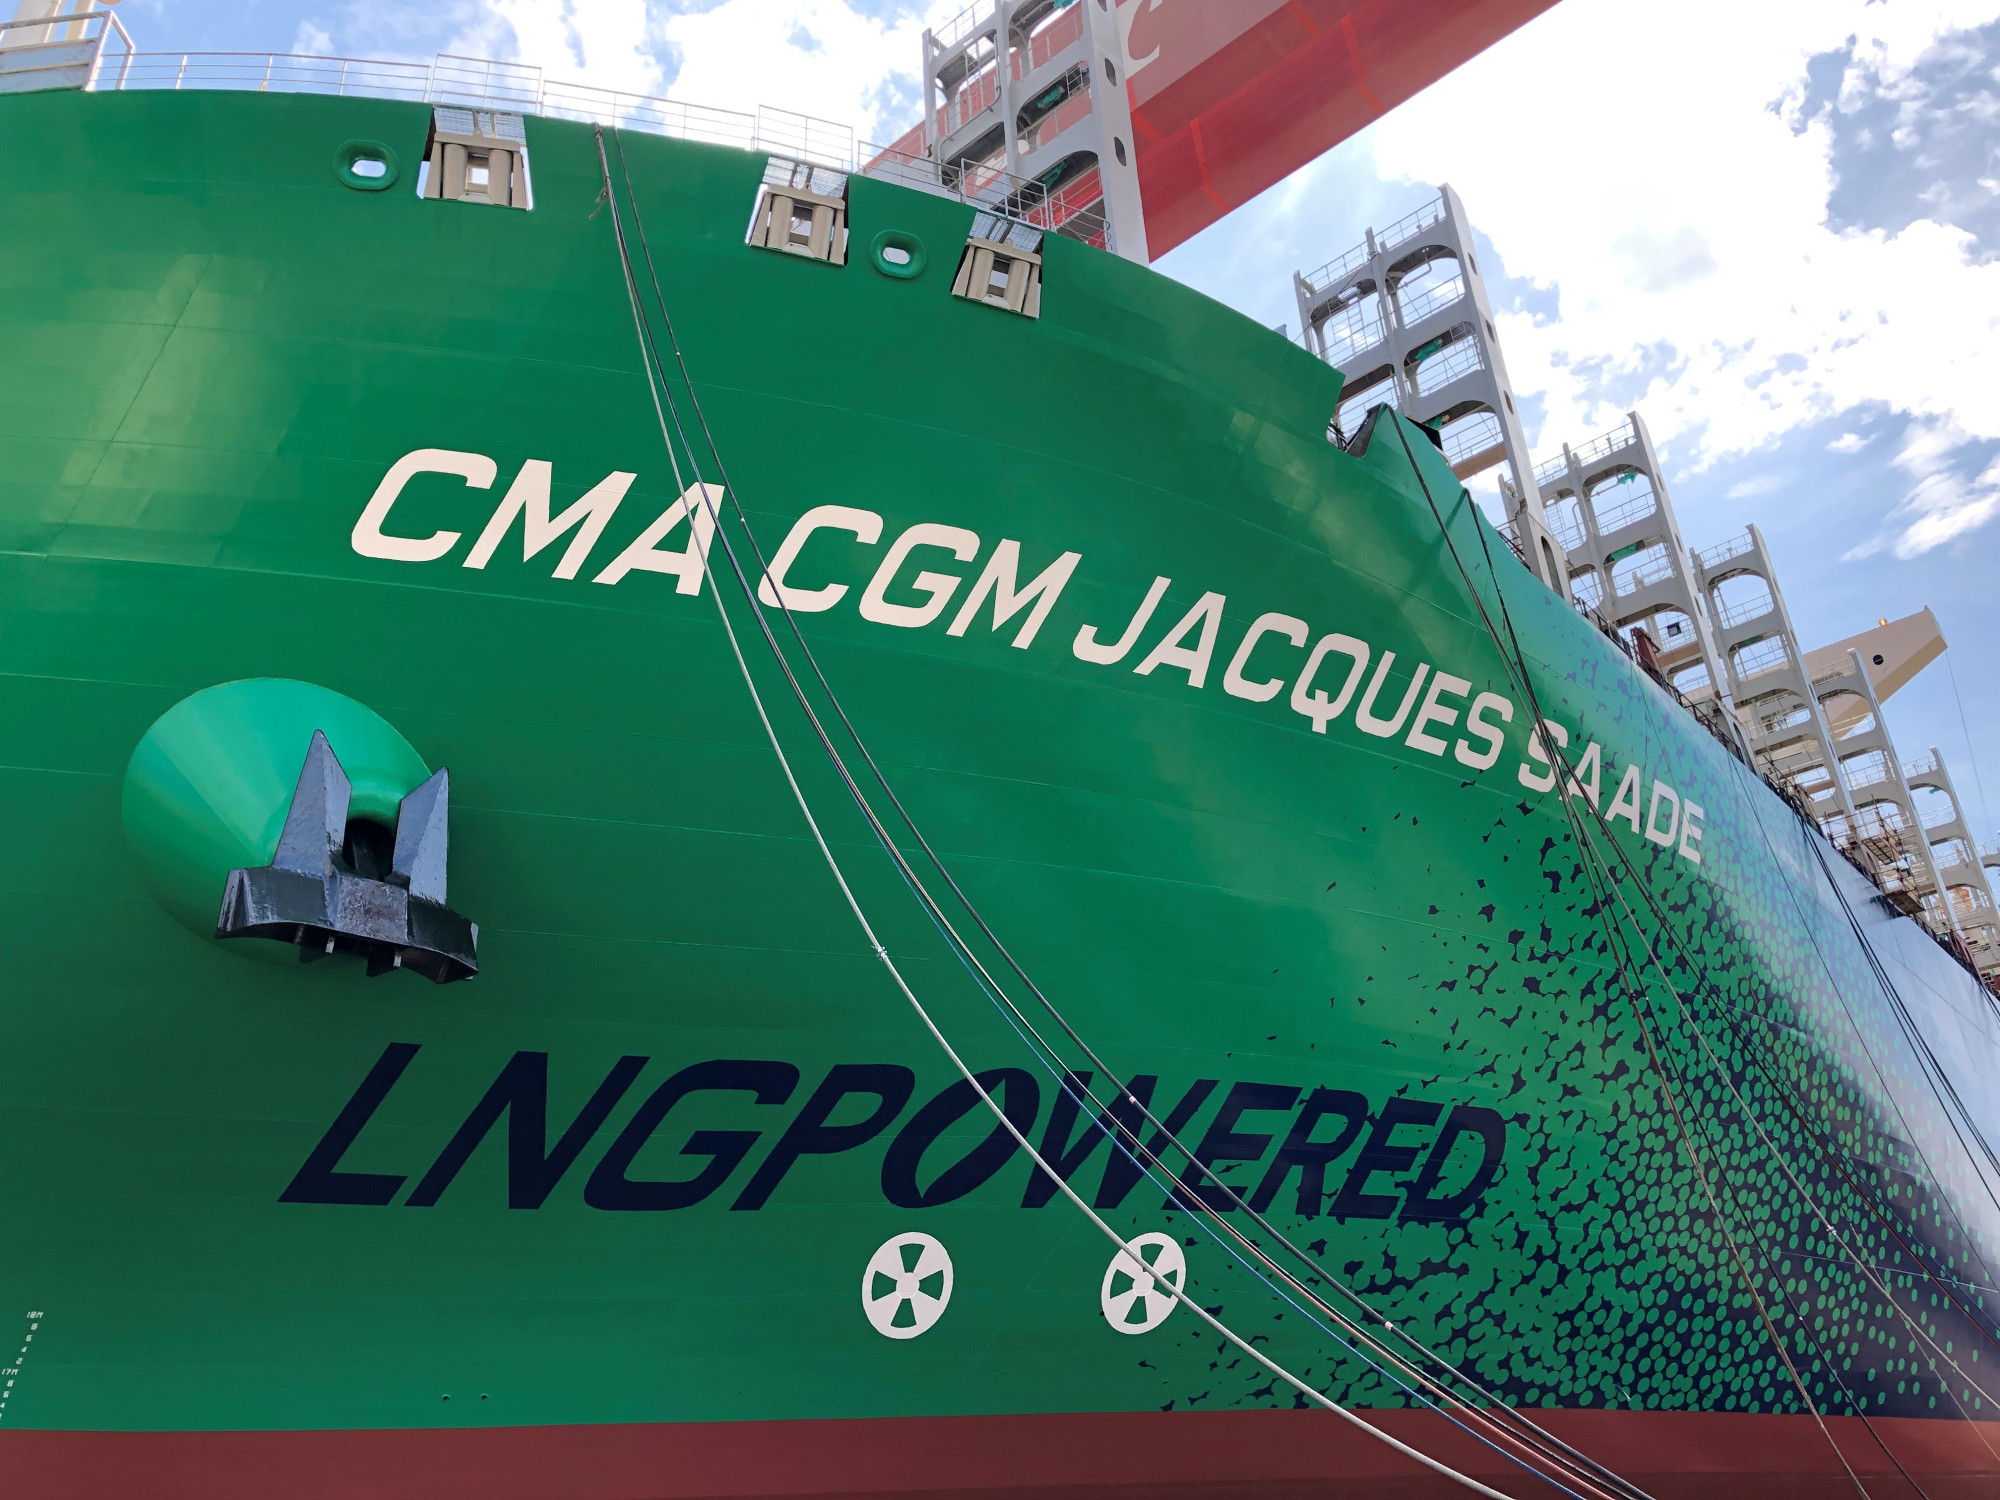 CMA CGM Group’s 23,000-TEU LNG-powered container ship Jacques Saade. The company plans to deploy 77 LNG-powered vessels by the end of 2026. Photo: Handout